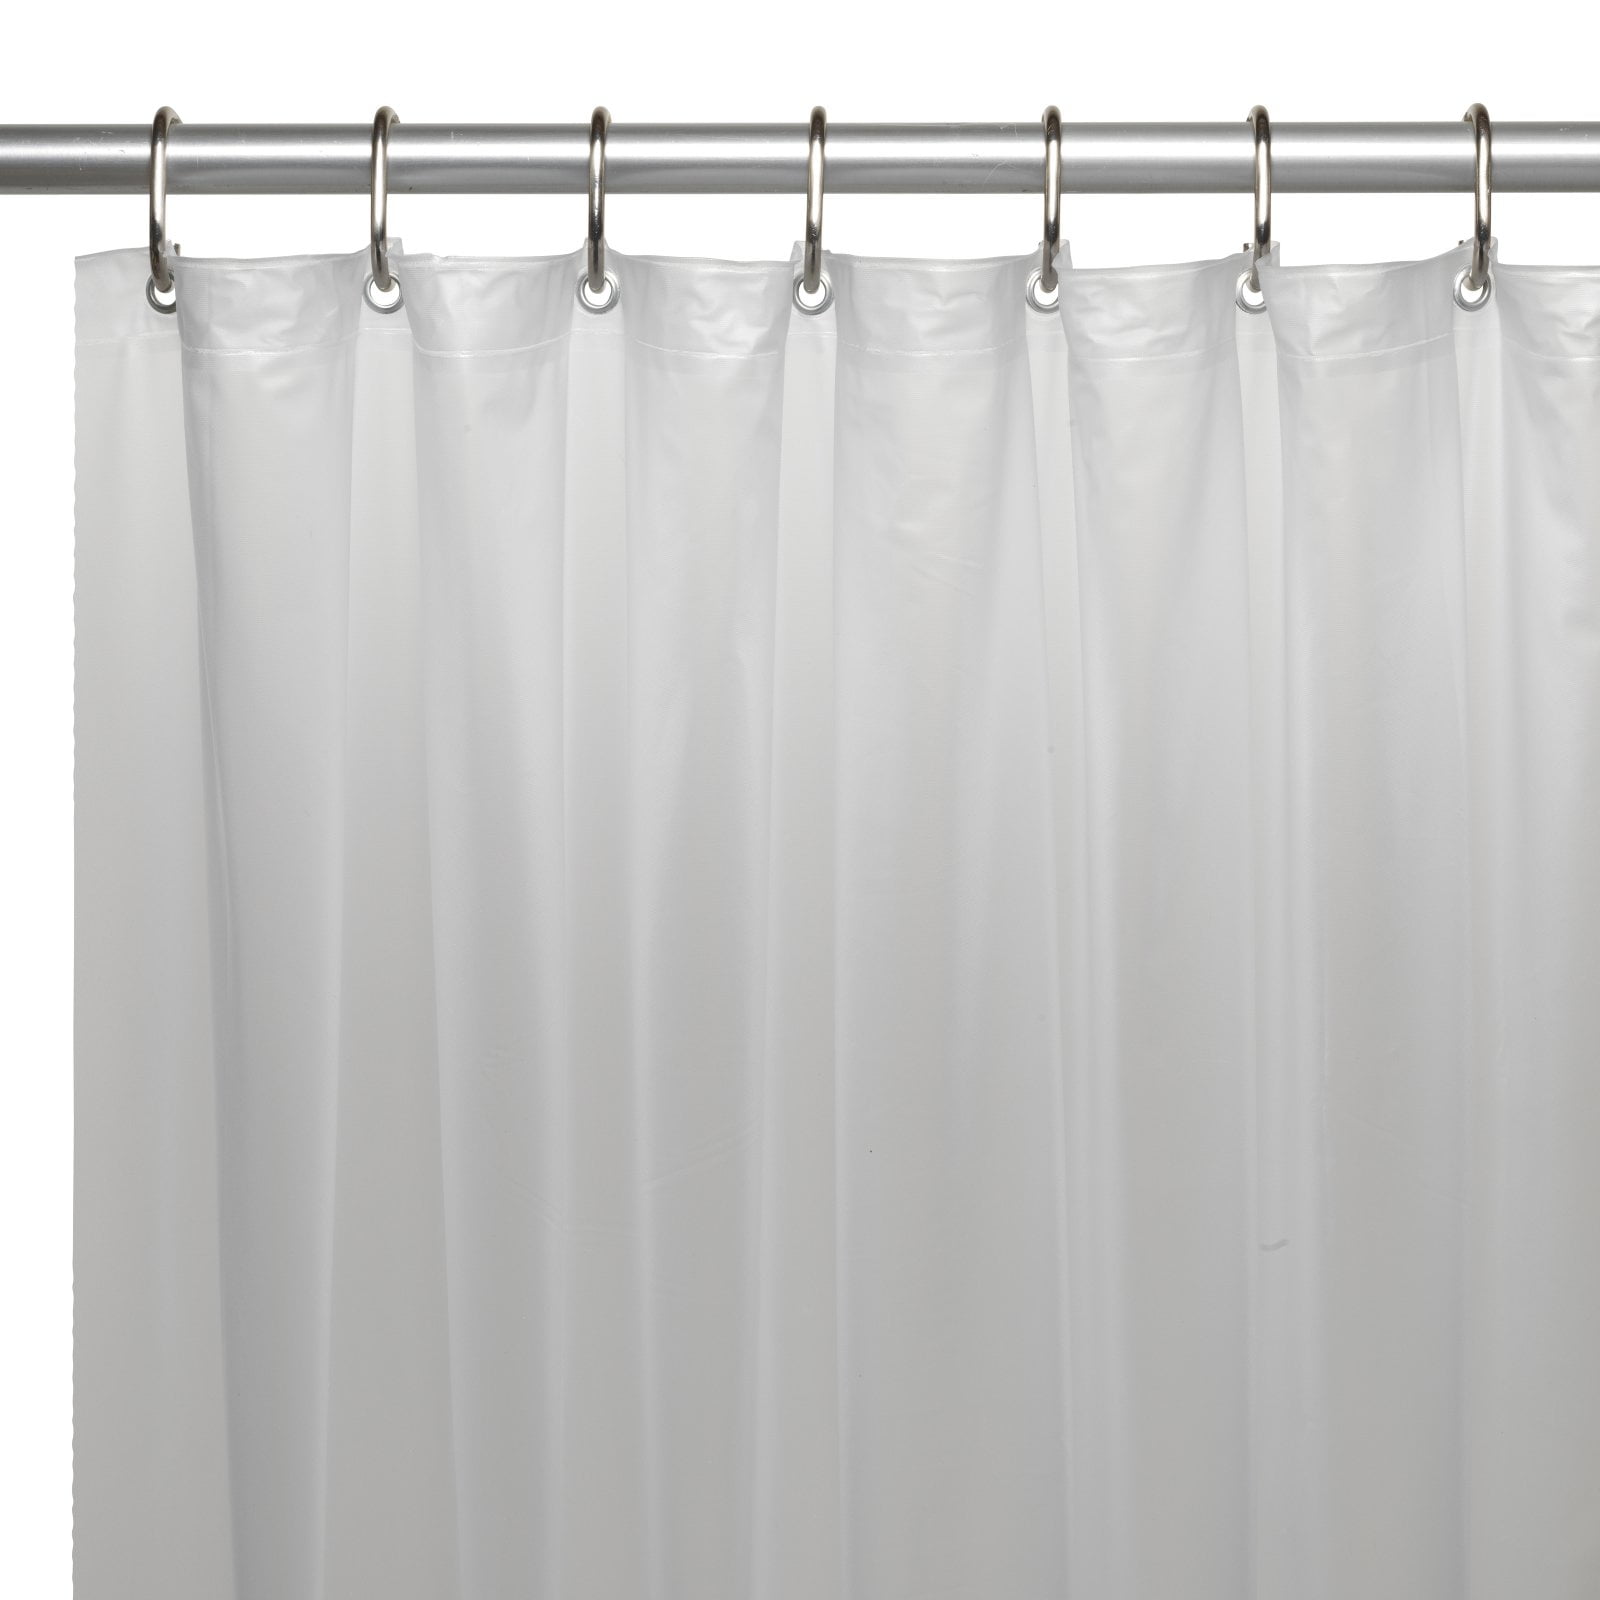 2 Pc Frosted Clear Shower Curtain Liner Vinyl Magnetic Mildew Repellent 70 x 72 